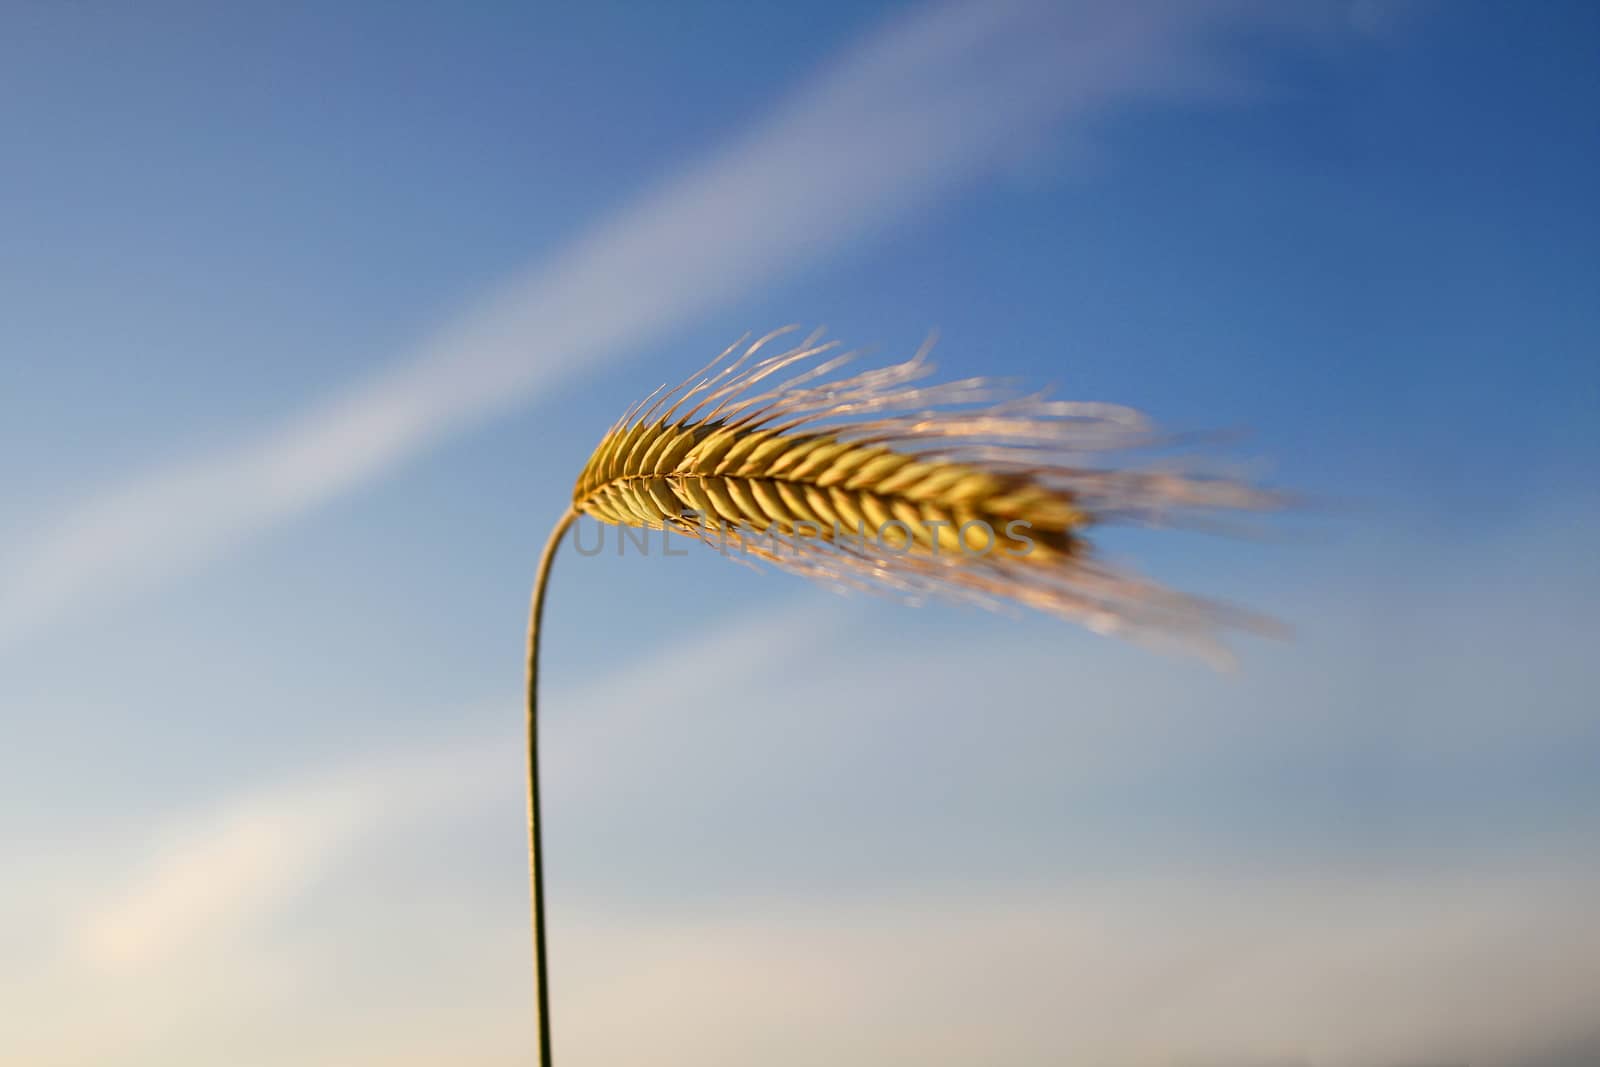 Close up of golden wheat ear in summertime, against a blue sky

